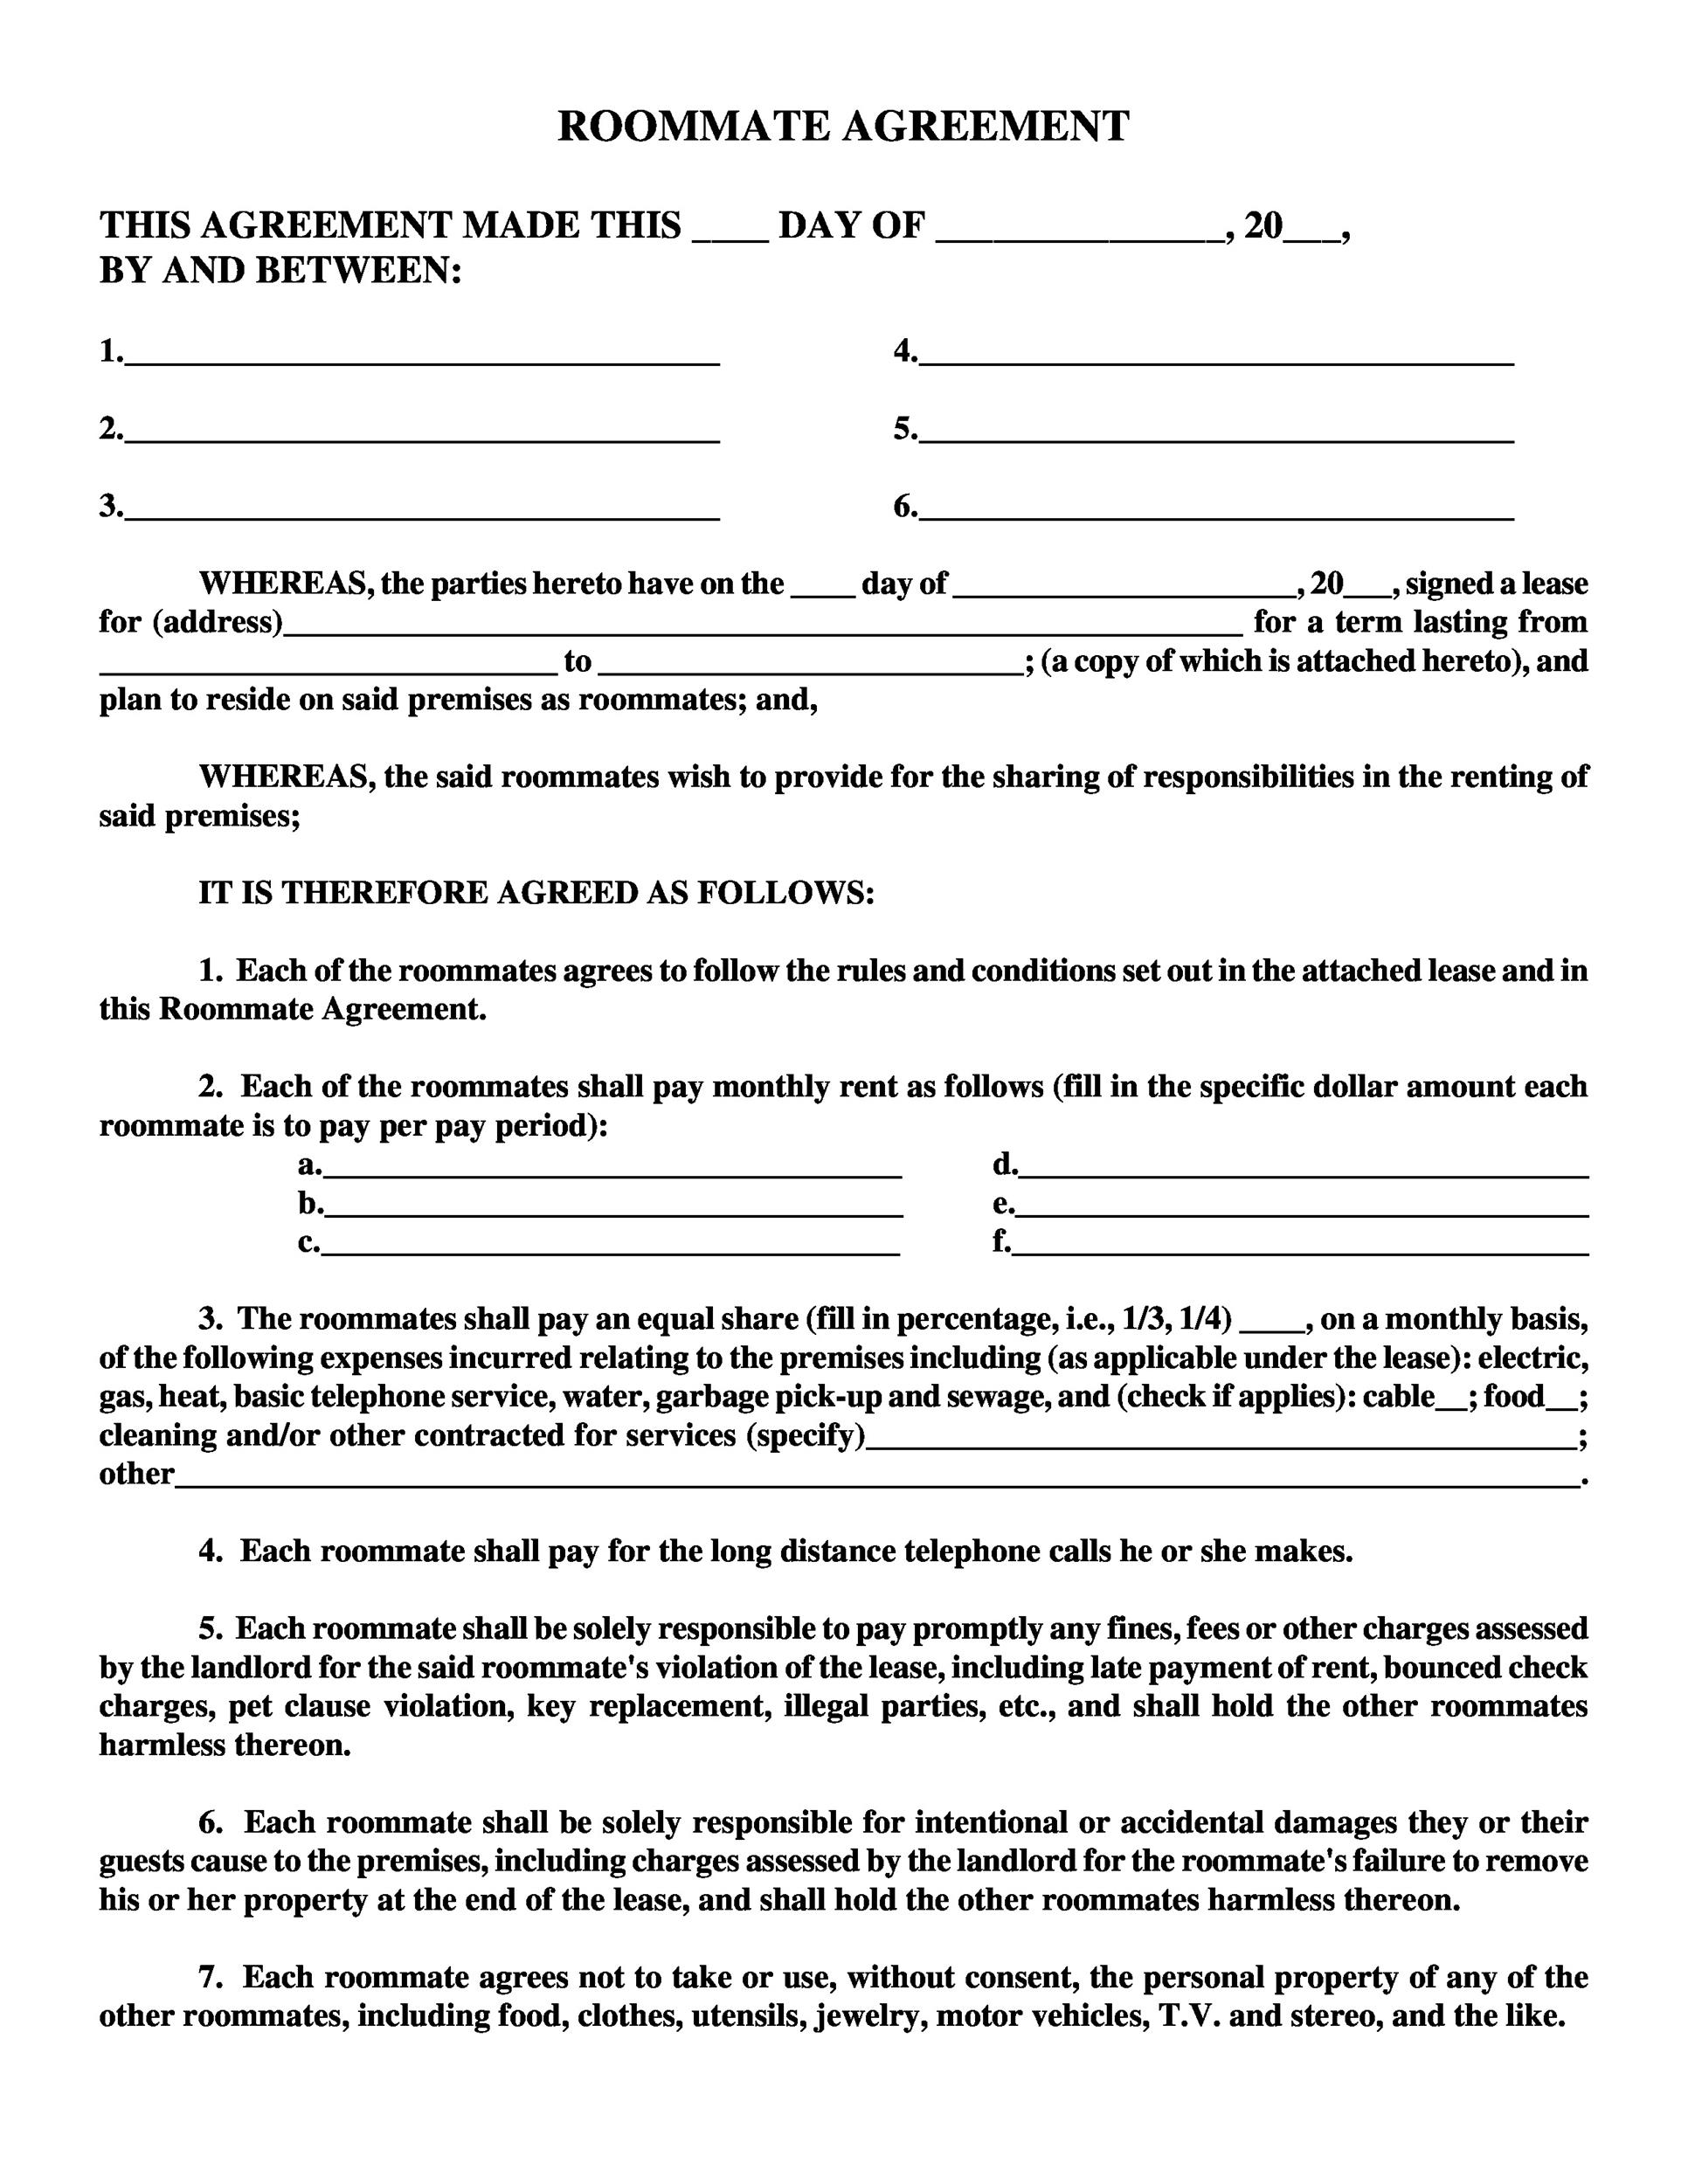 40 free roommate agreement templates forms word pdf